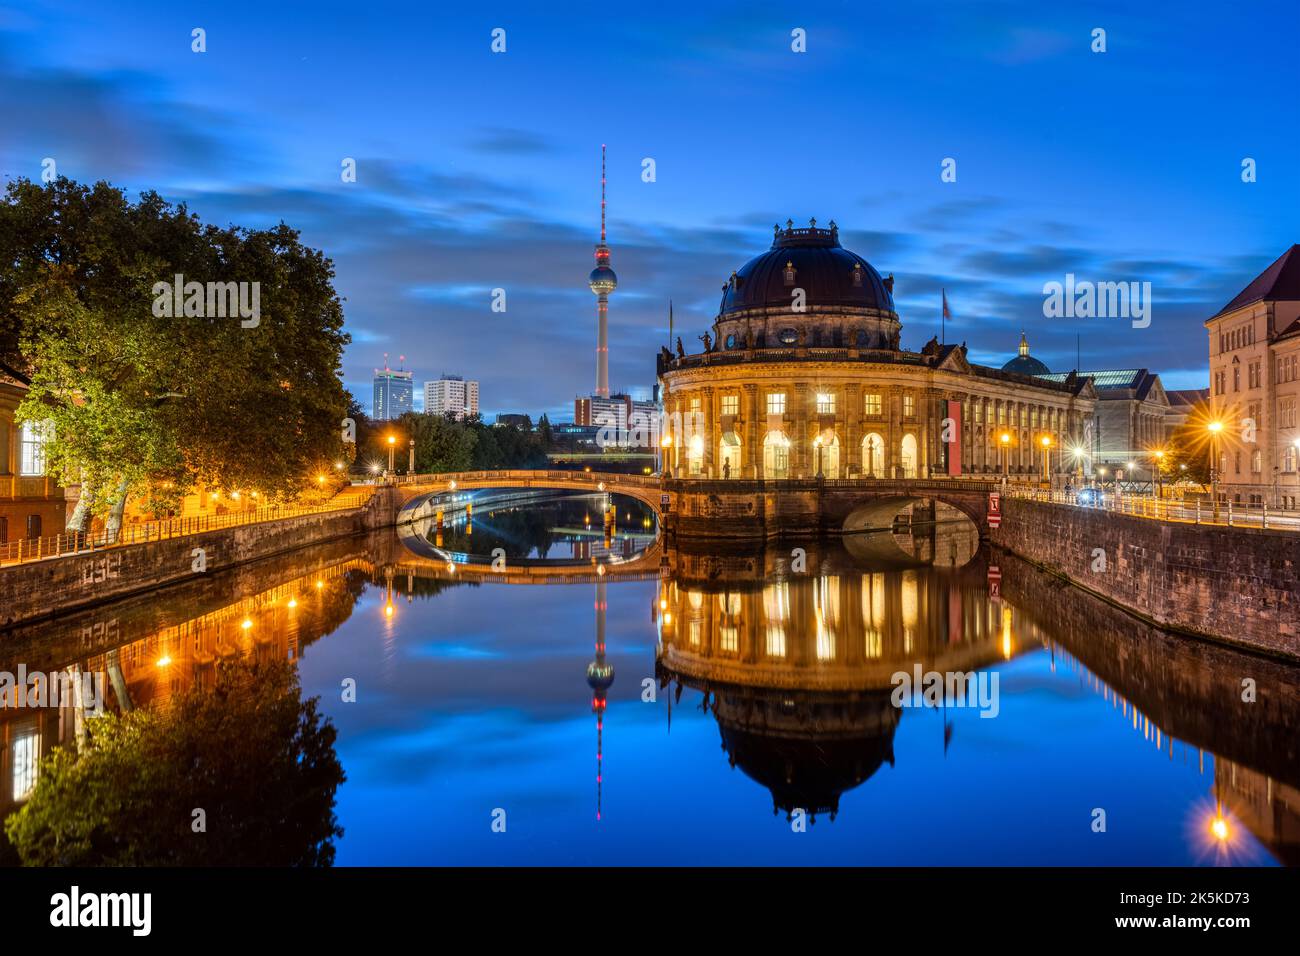 The Bode-Museum and the Television Tower reflected in the river Spree in Berlin at night Stock Photo